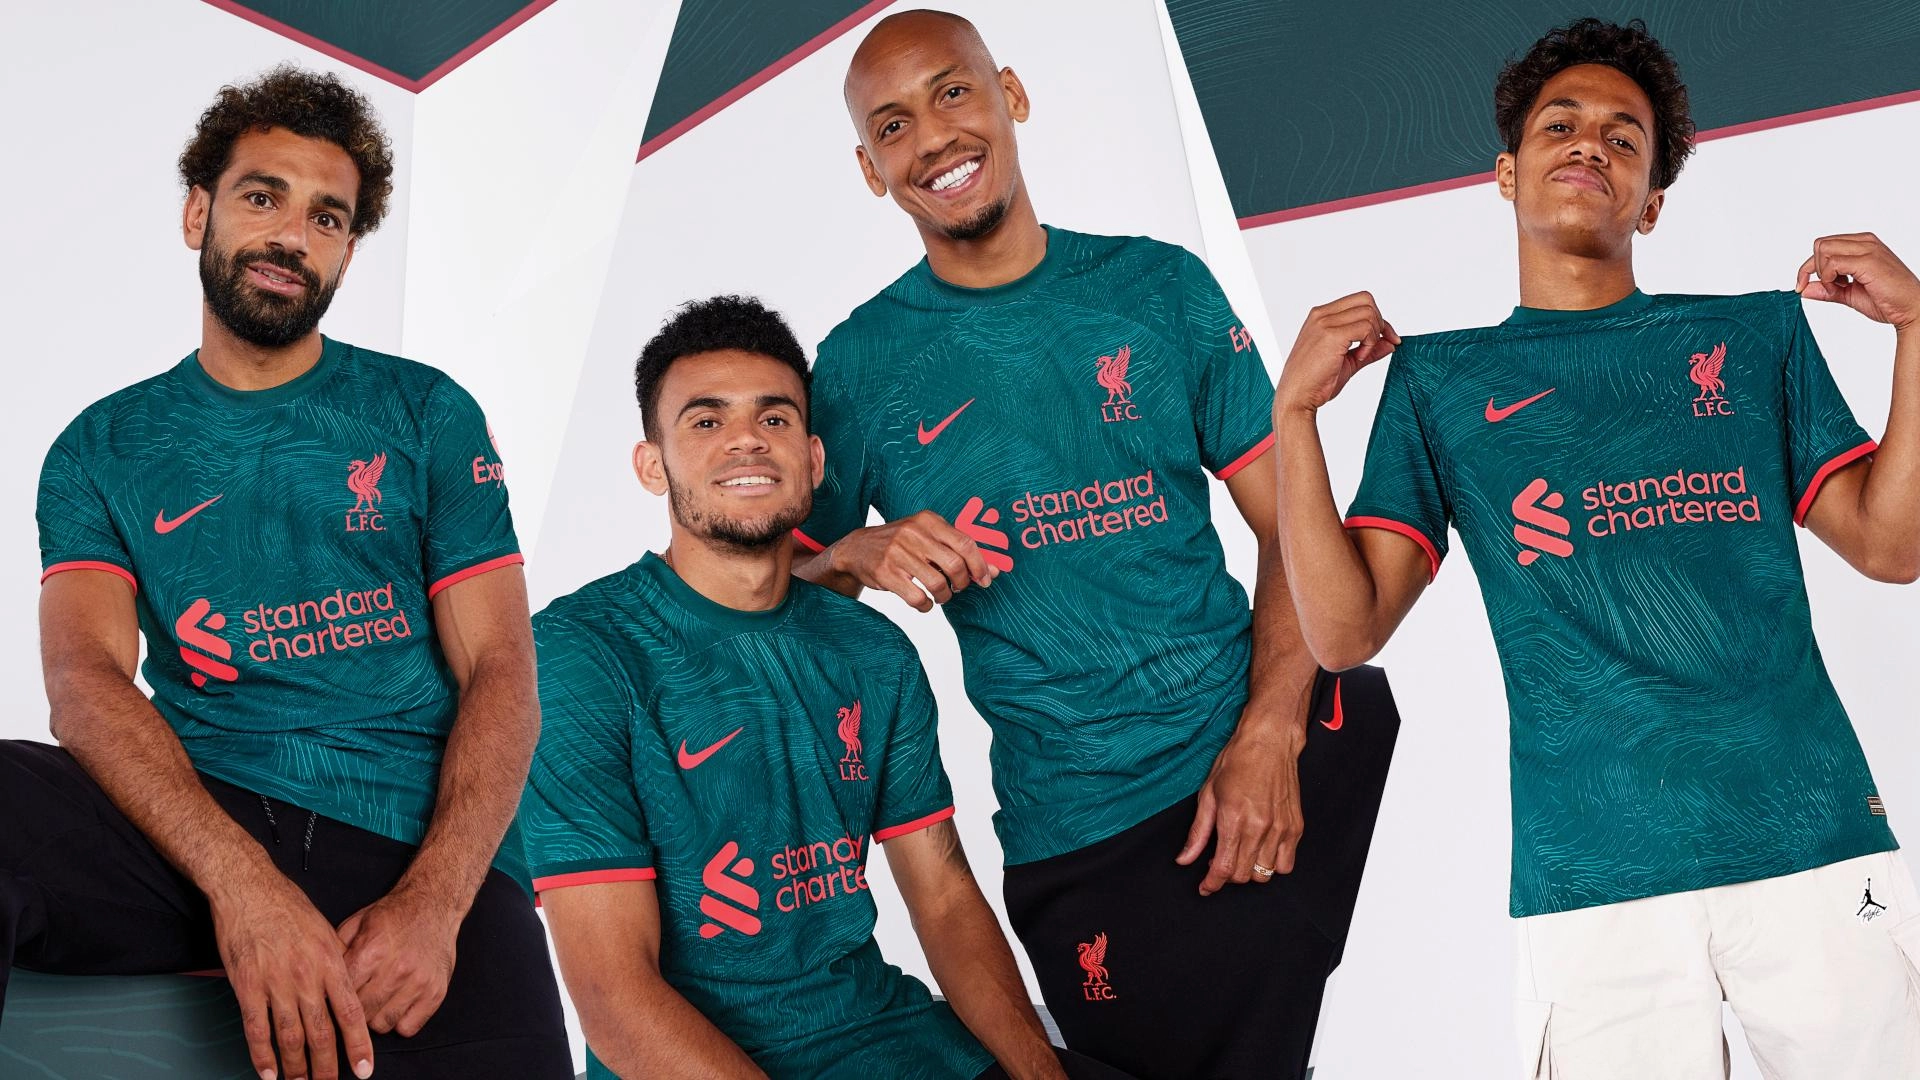 LFC unveils 2022-23 third kit with celebration of European support